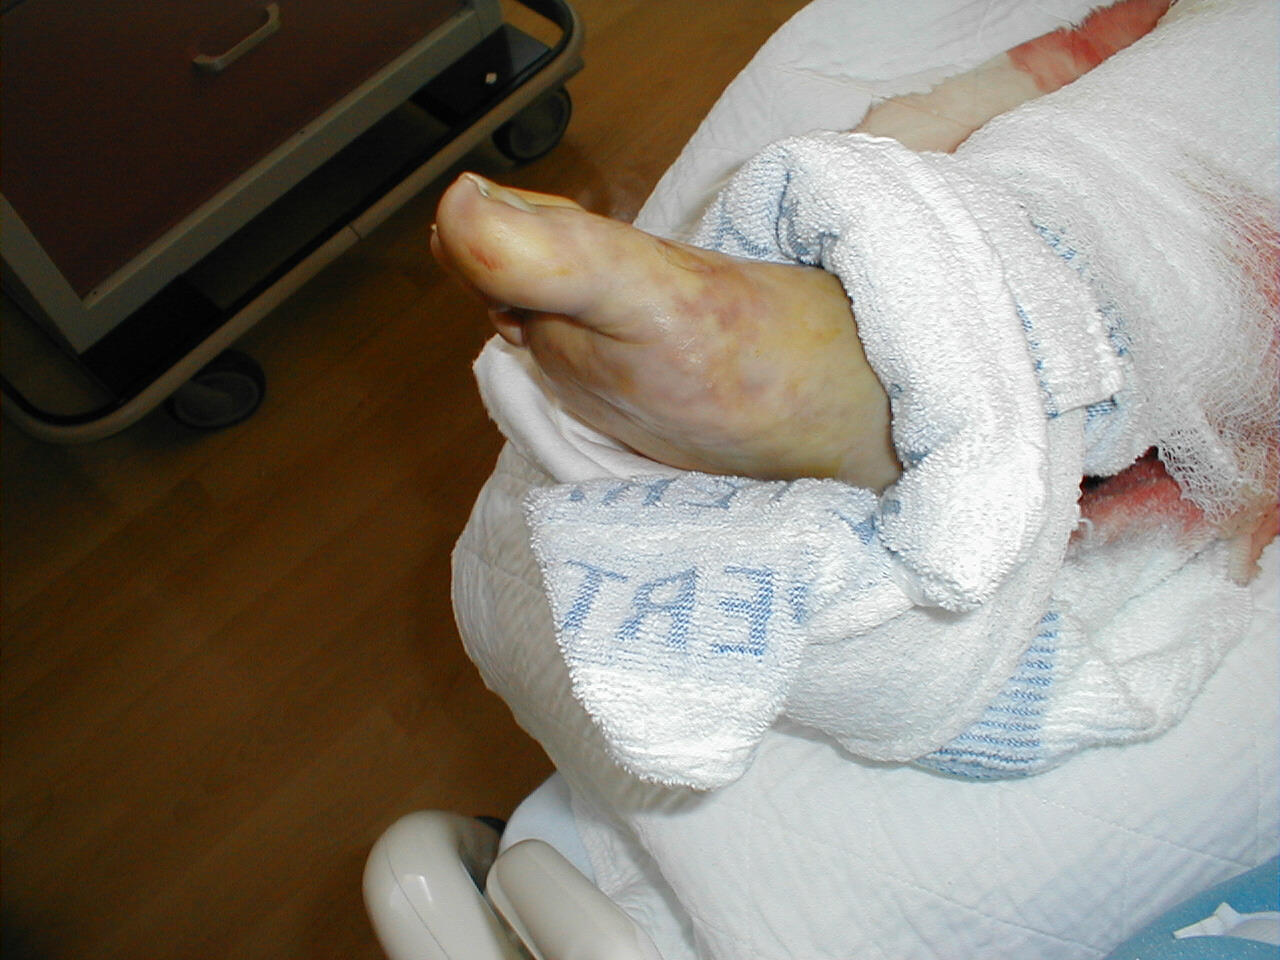 Acute Arterial Insufficiency: Embolus to right lower extremity resulted in acute vascular insufficiency to foot. Note mottled appearance. (Image courtesy of Charlie Goldberg, M.D., UCSD School of Medicine and VA Medical Center, San Diego, California)